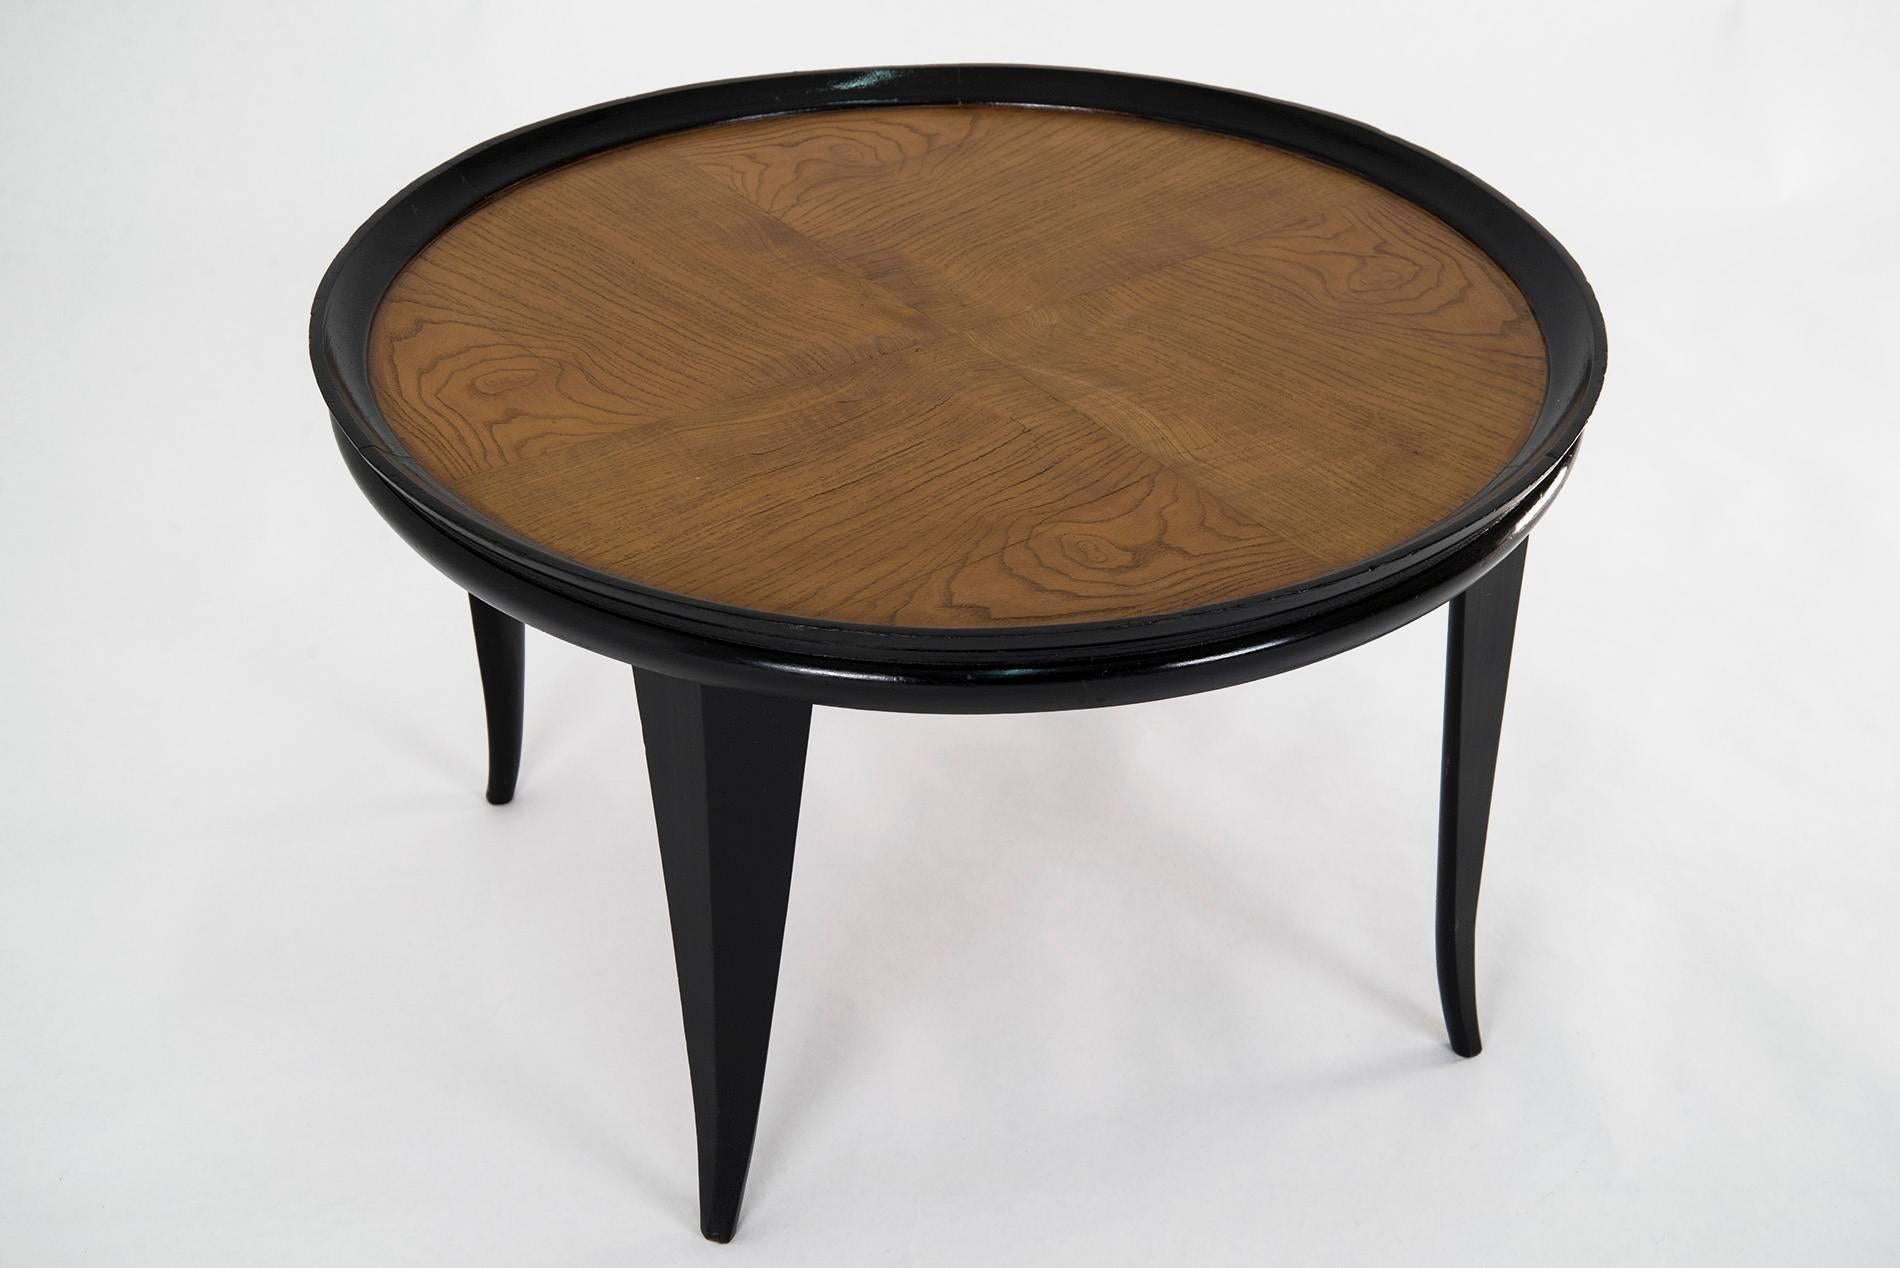 Elegant round coffee table in the manner of Gio Ponti, manufactured in Italy in the 1940s. Carved black lacquered wooden base, top in a natural veneer. Good original vintage conditions.